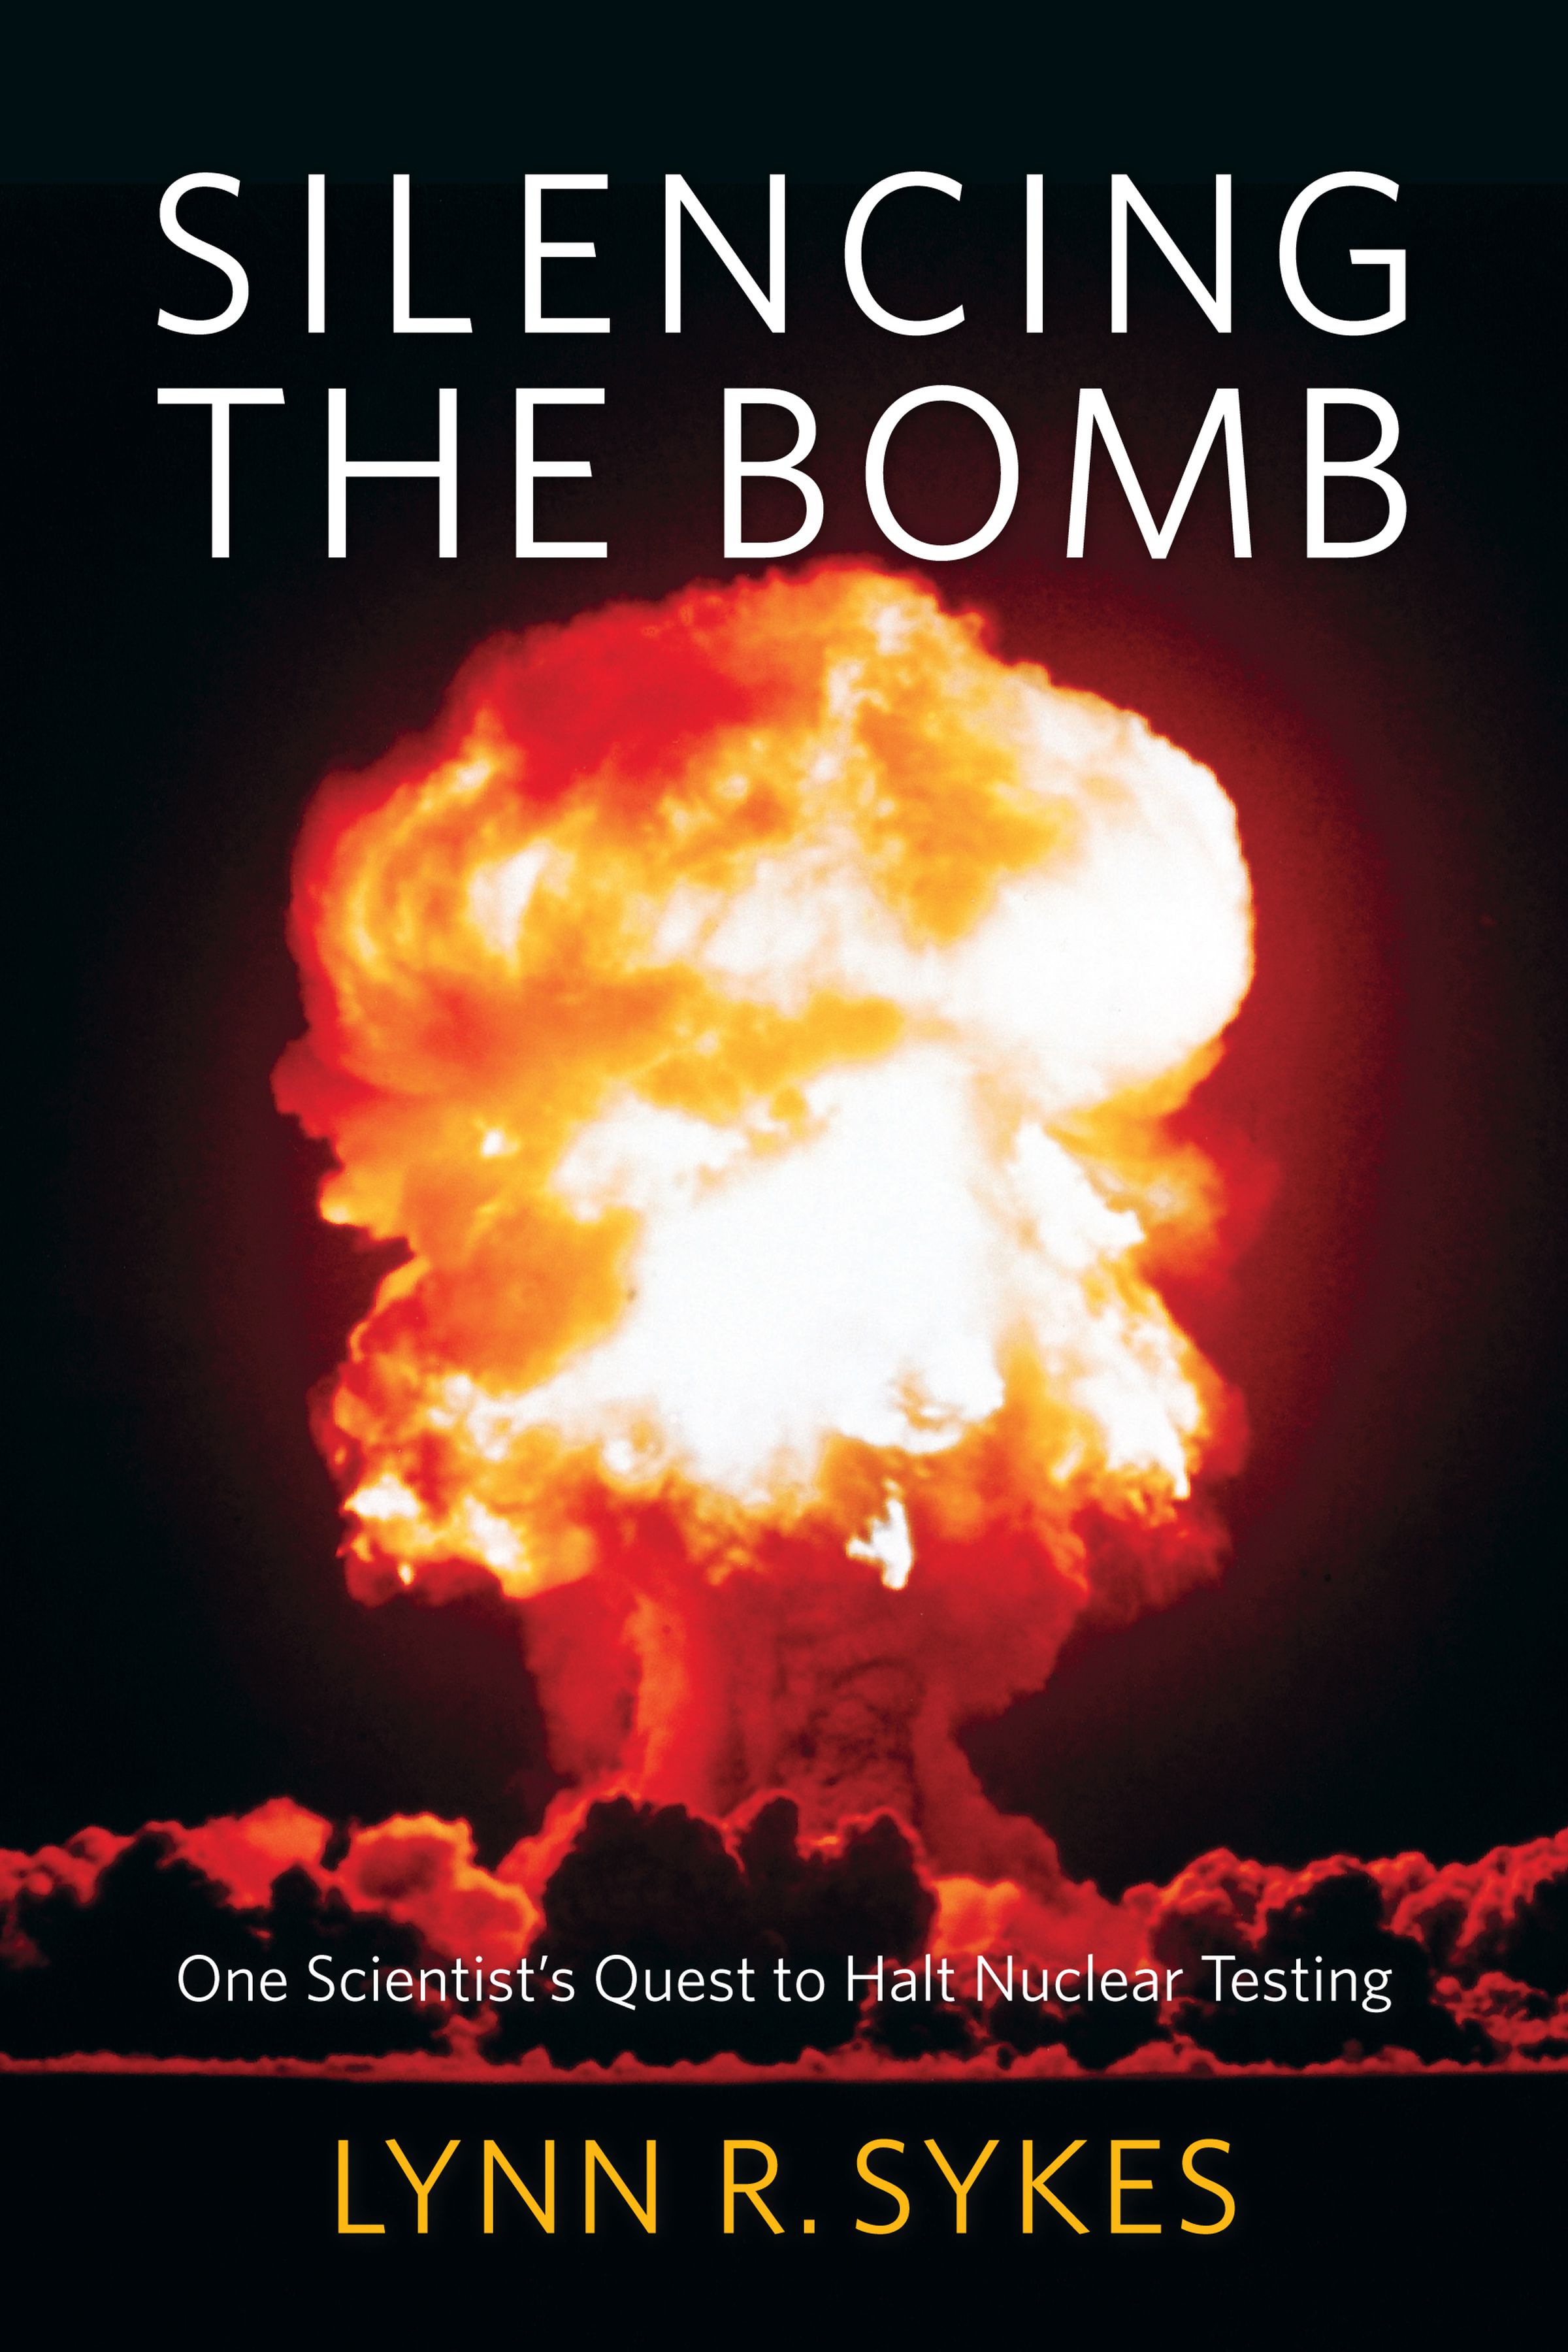 The cover of Lynn Sykes’ book, Silencing the Bomb: One Scientist’s Quest to Halt Nuclear Testing.